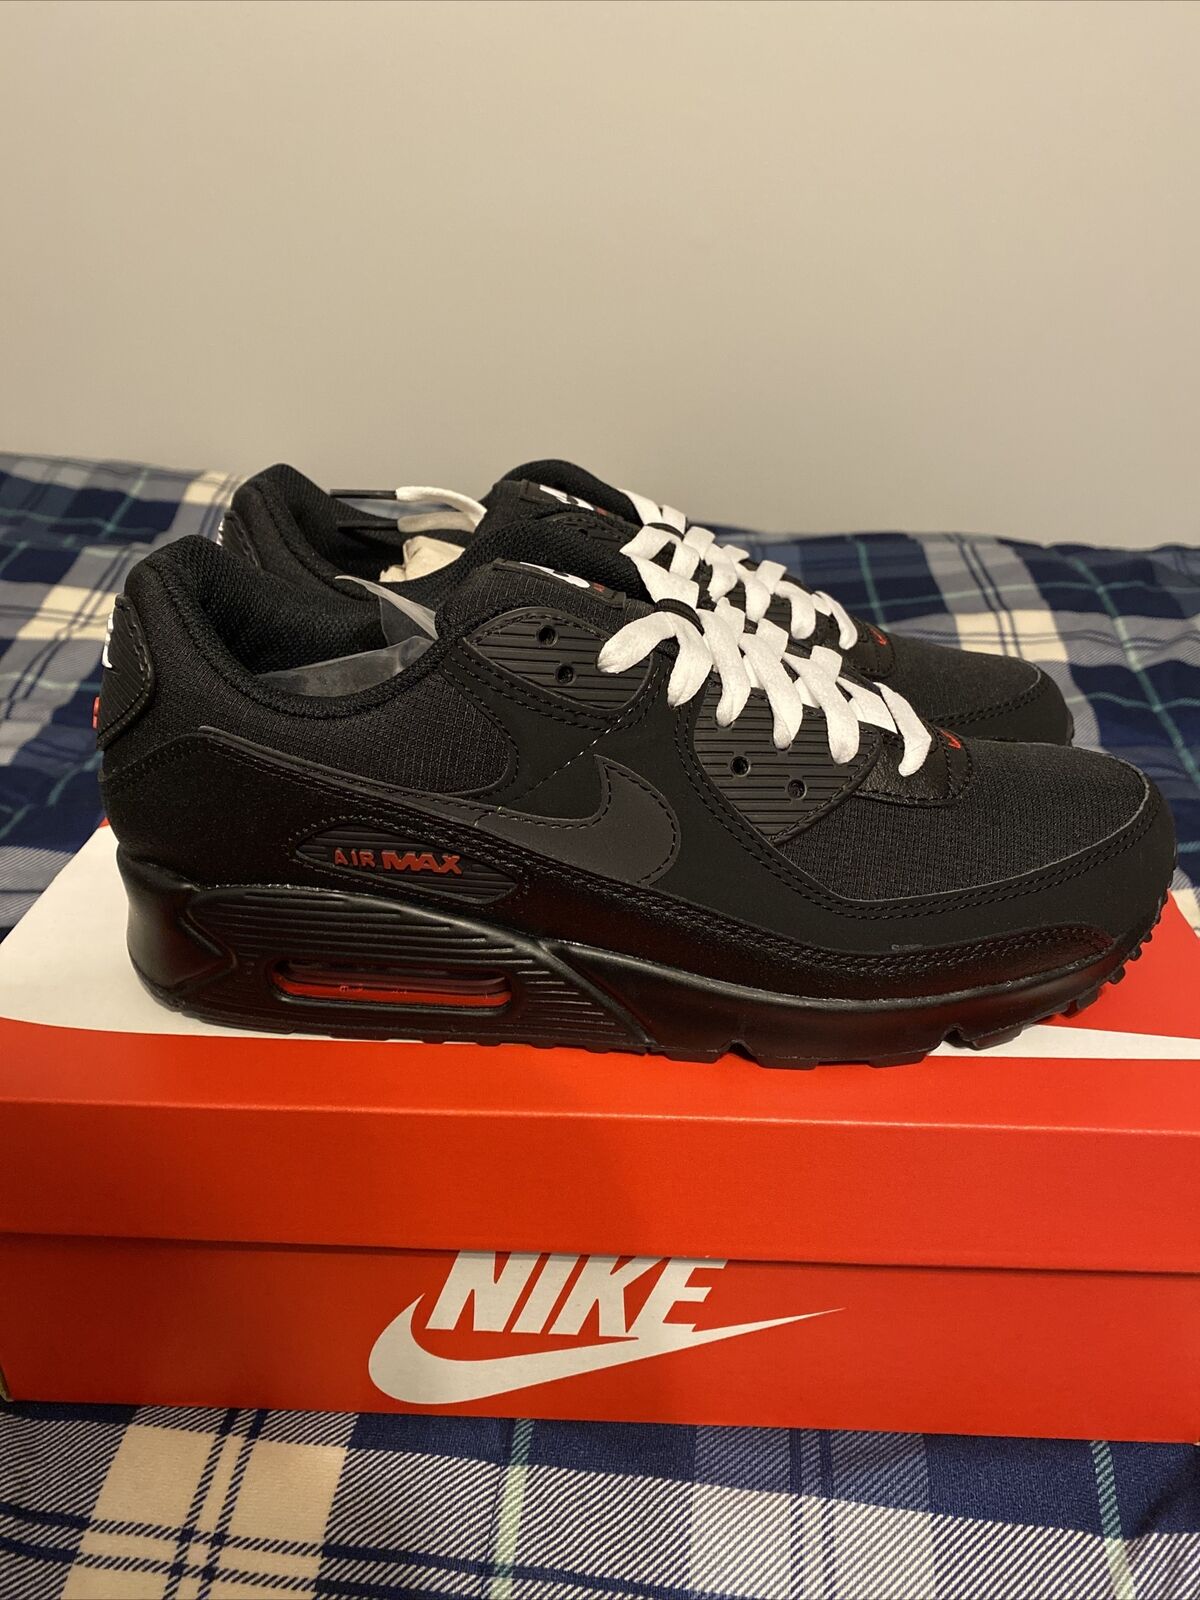 Nike Air Max 90 Shoes Black White Sport Red DC9388-002 Men's Size 9 NEW